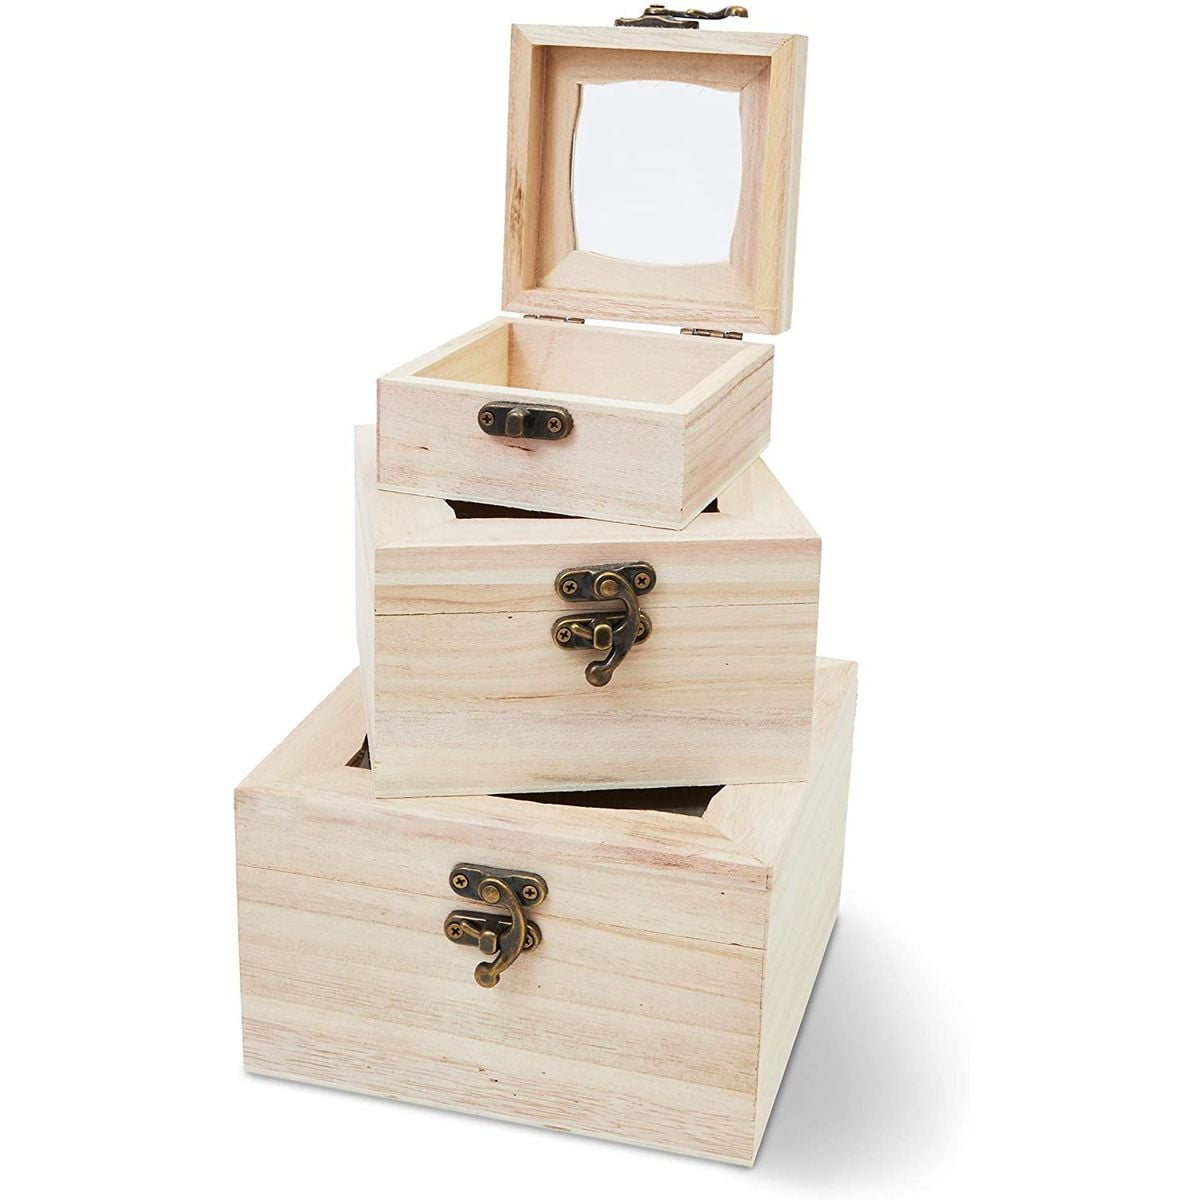 Wooden Rustic Box With Lock For Crafting Materials And Gifts Jewelry Accessories 